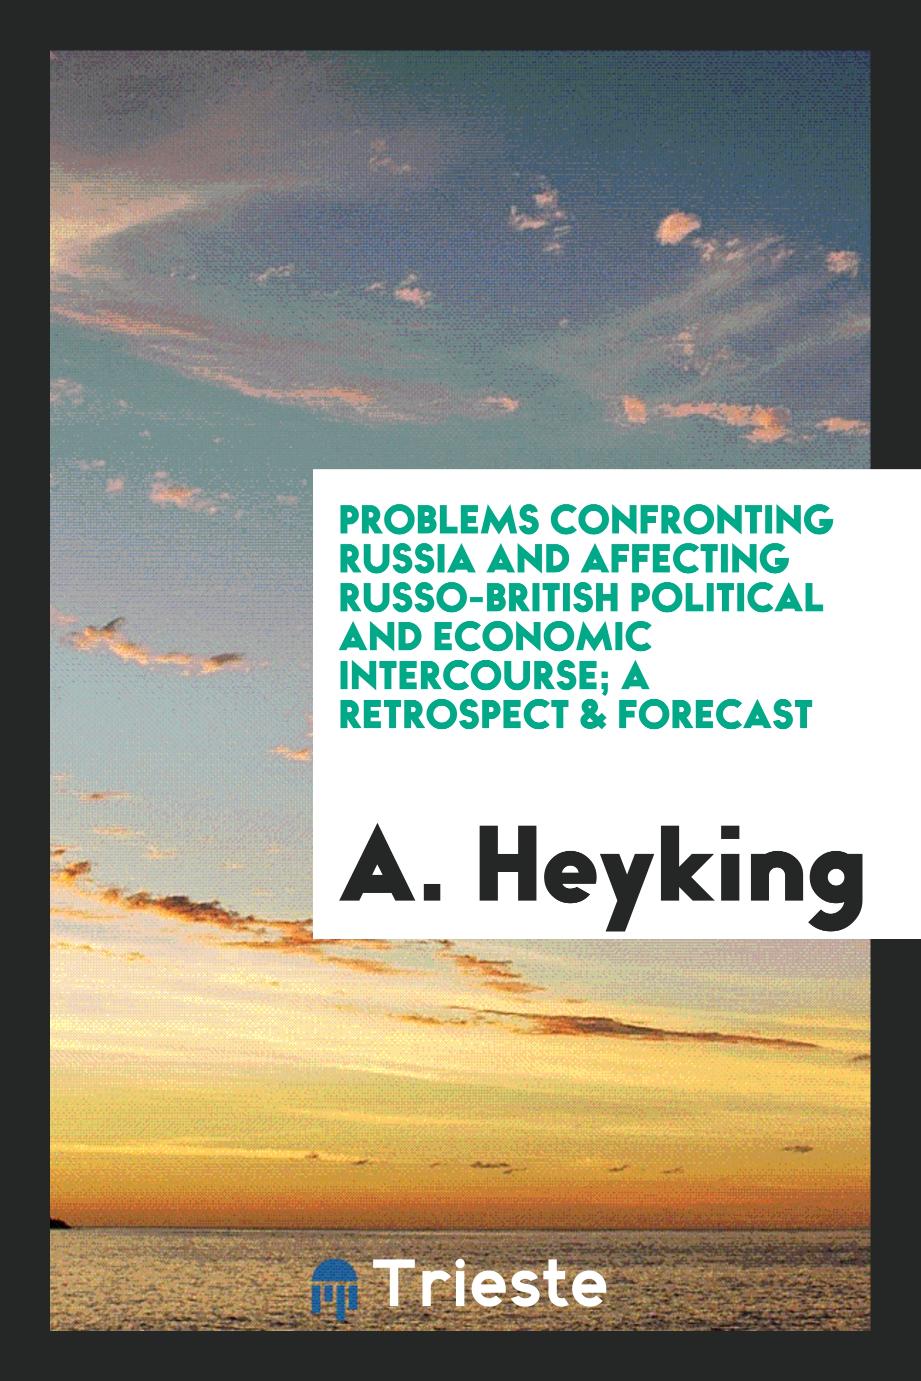 Problems confronting Russia and affecting Russo-British political and economic intercourse; a retrospect & forecast